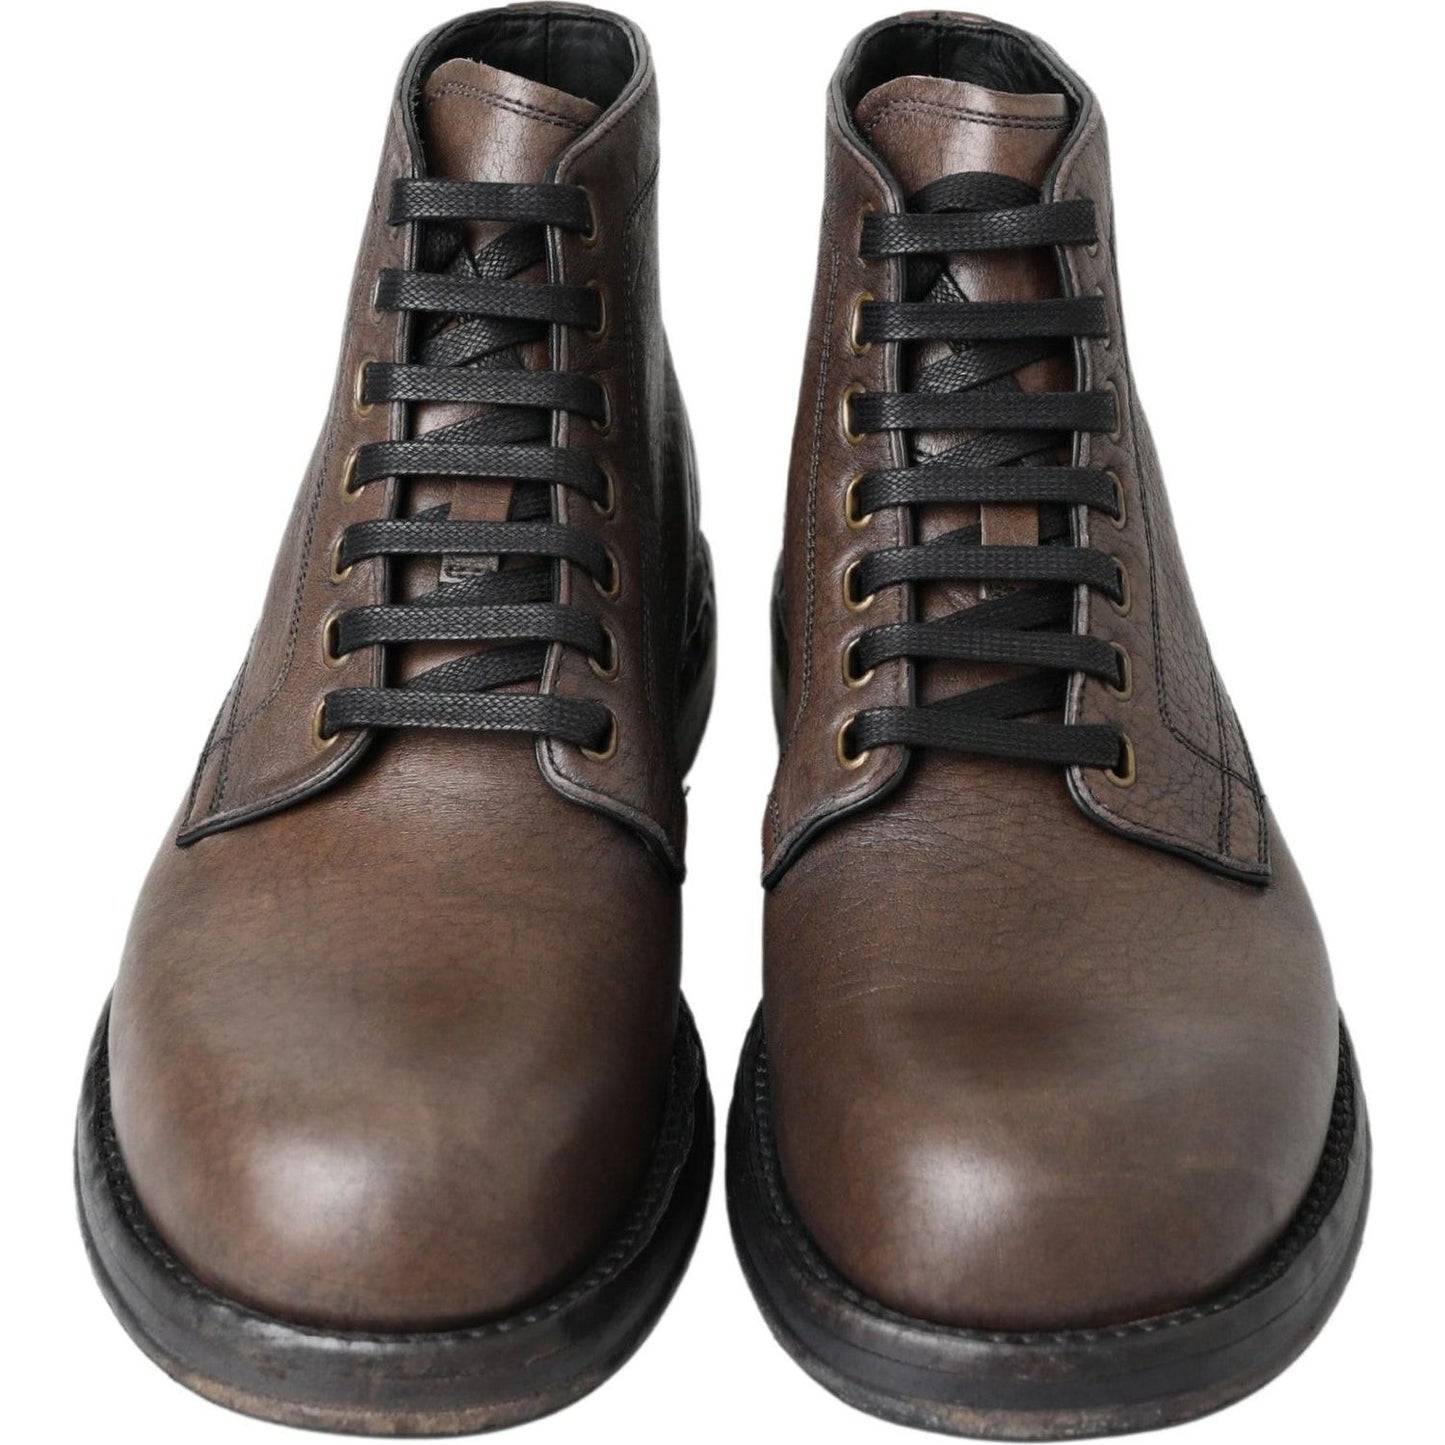 Dolce & Gabbana Elegant Horse Leather Lace-Up Boots brown-horse-leather-perugino-shoes 465A9843-41e7b01b-479.jpg